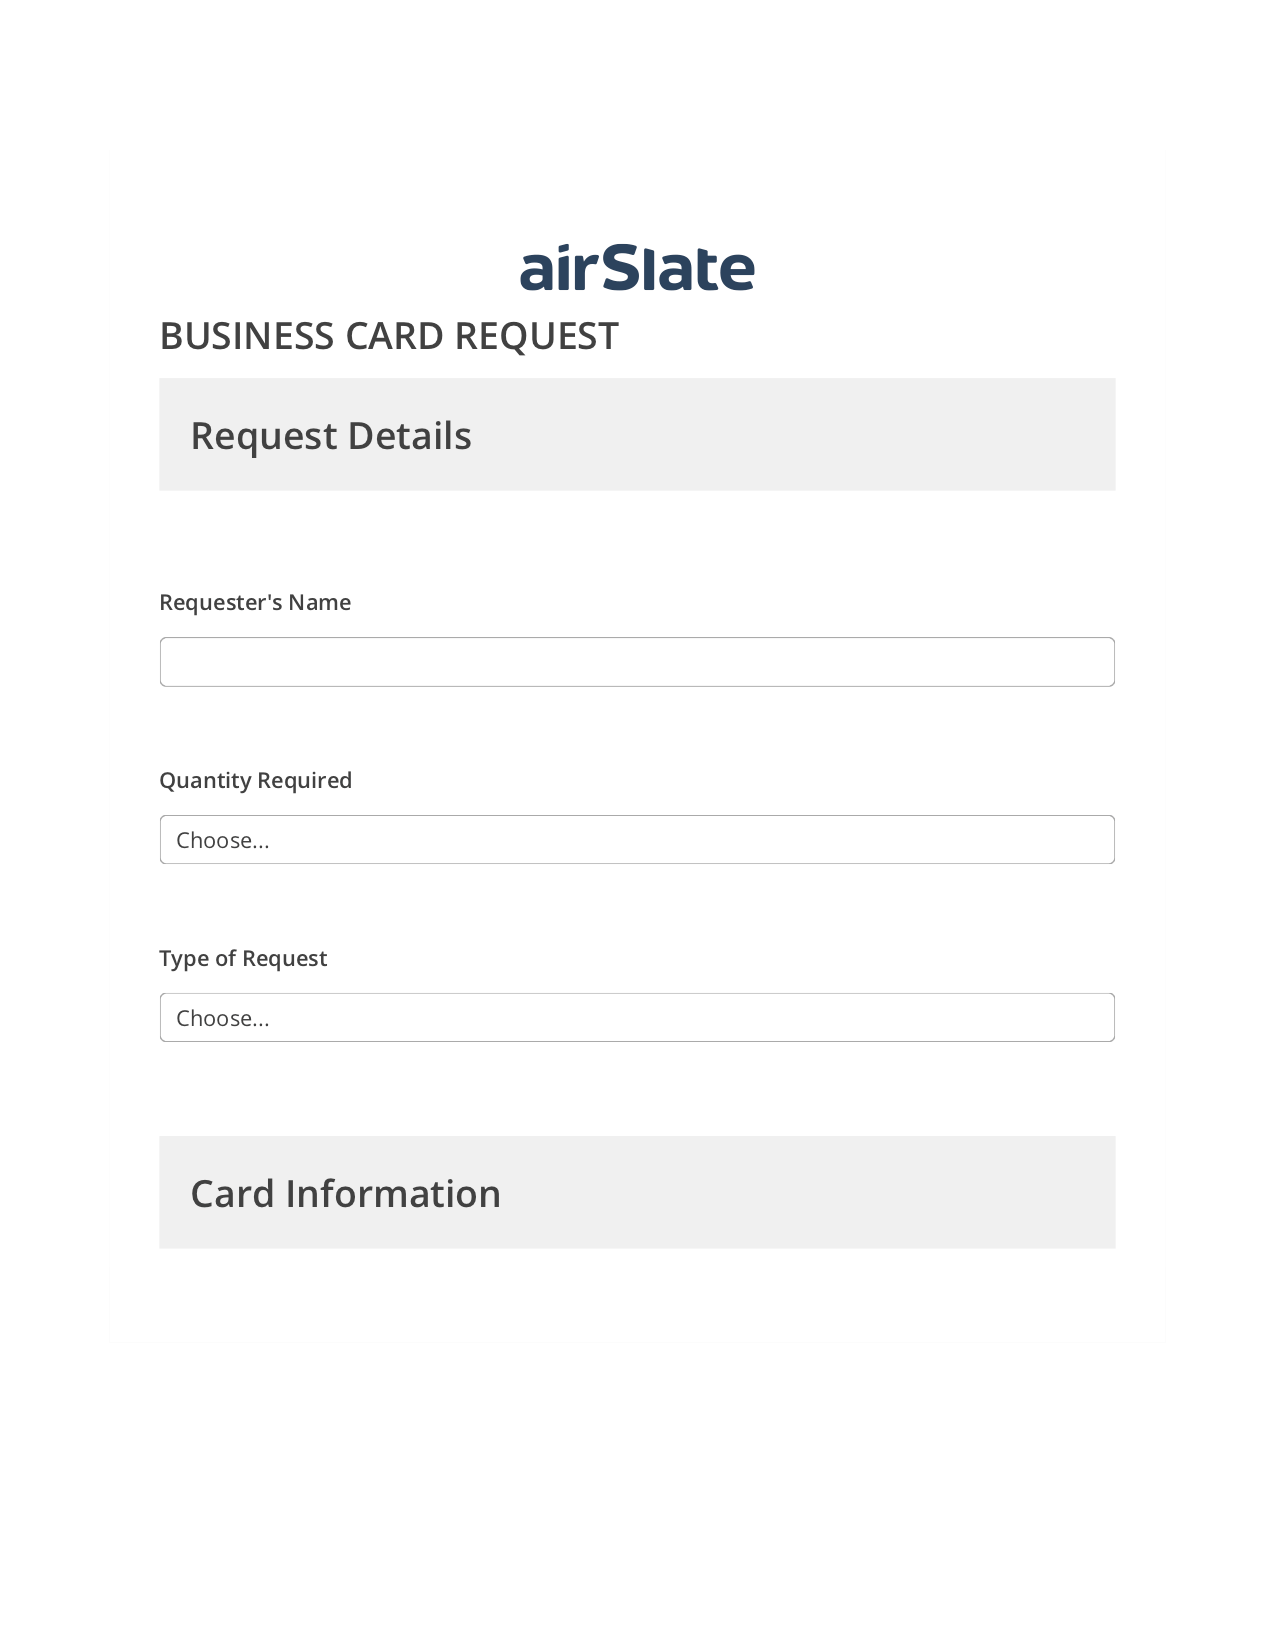 Business Card Request Flow Pre-fill from CSV File Bot